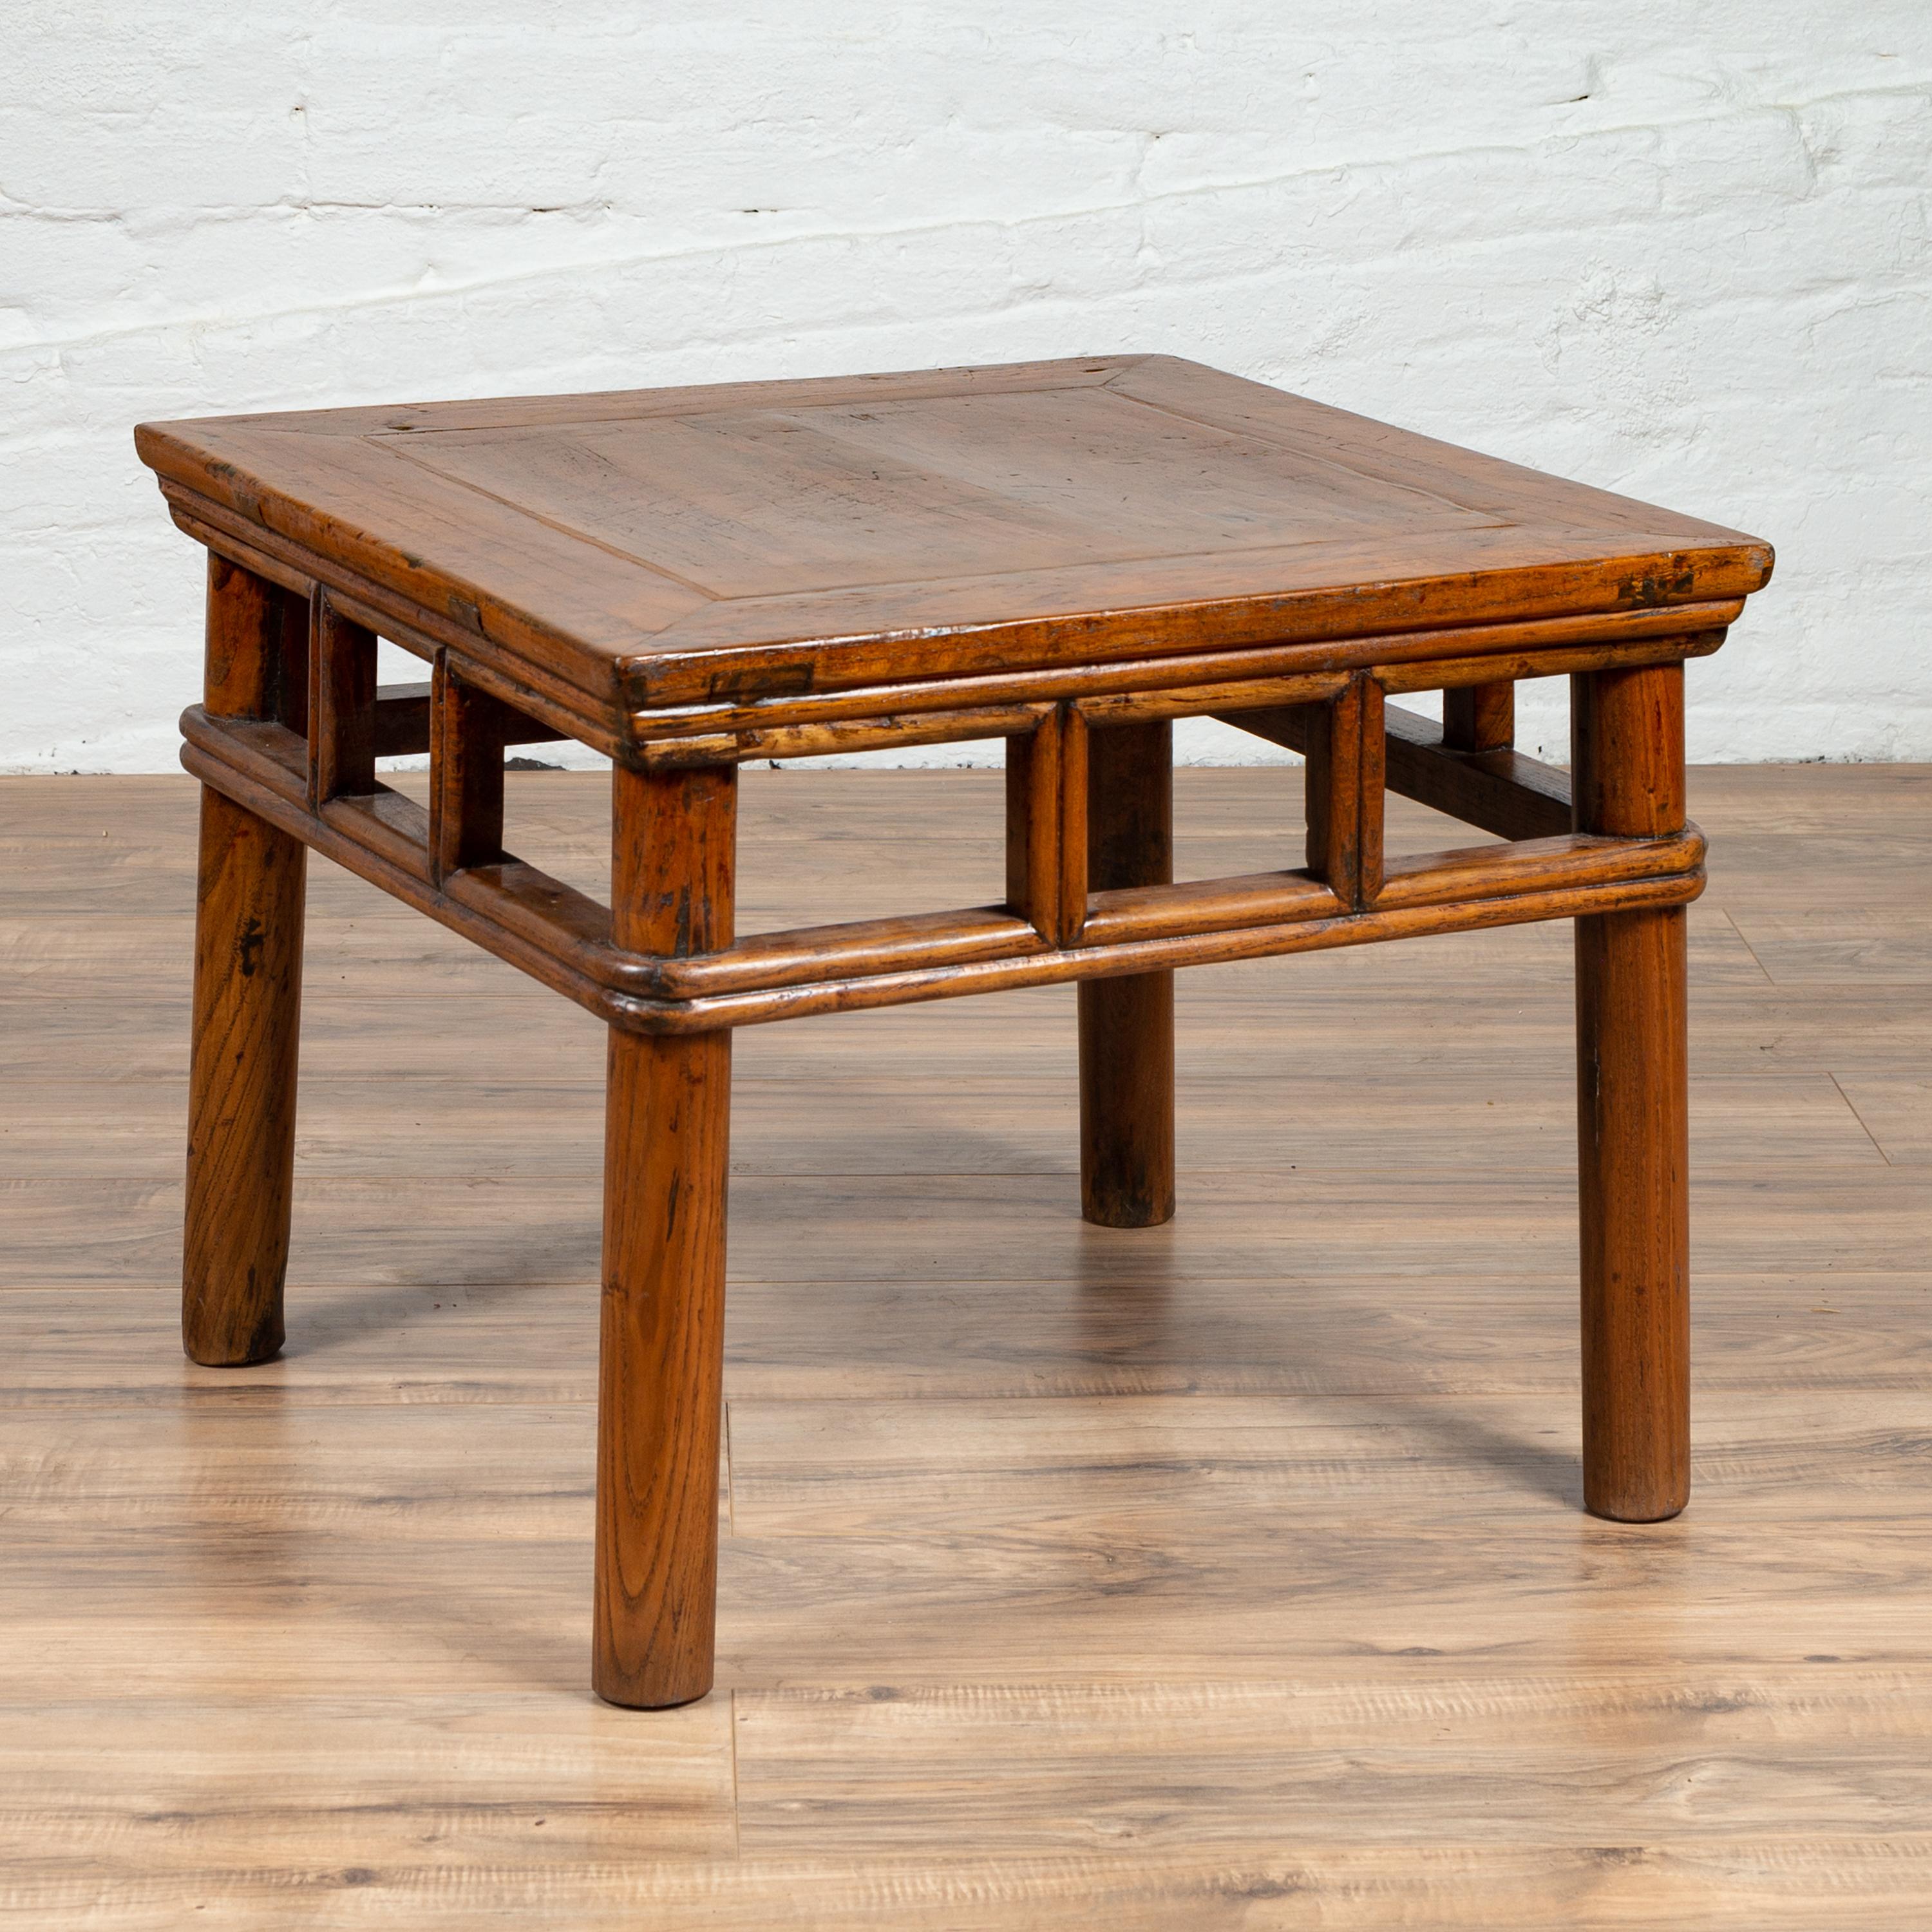 20th Century Antique Chinese Elmwood Table with Pierced Apron and Pillar-Shaped Struts Motifs